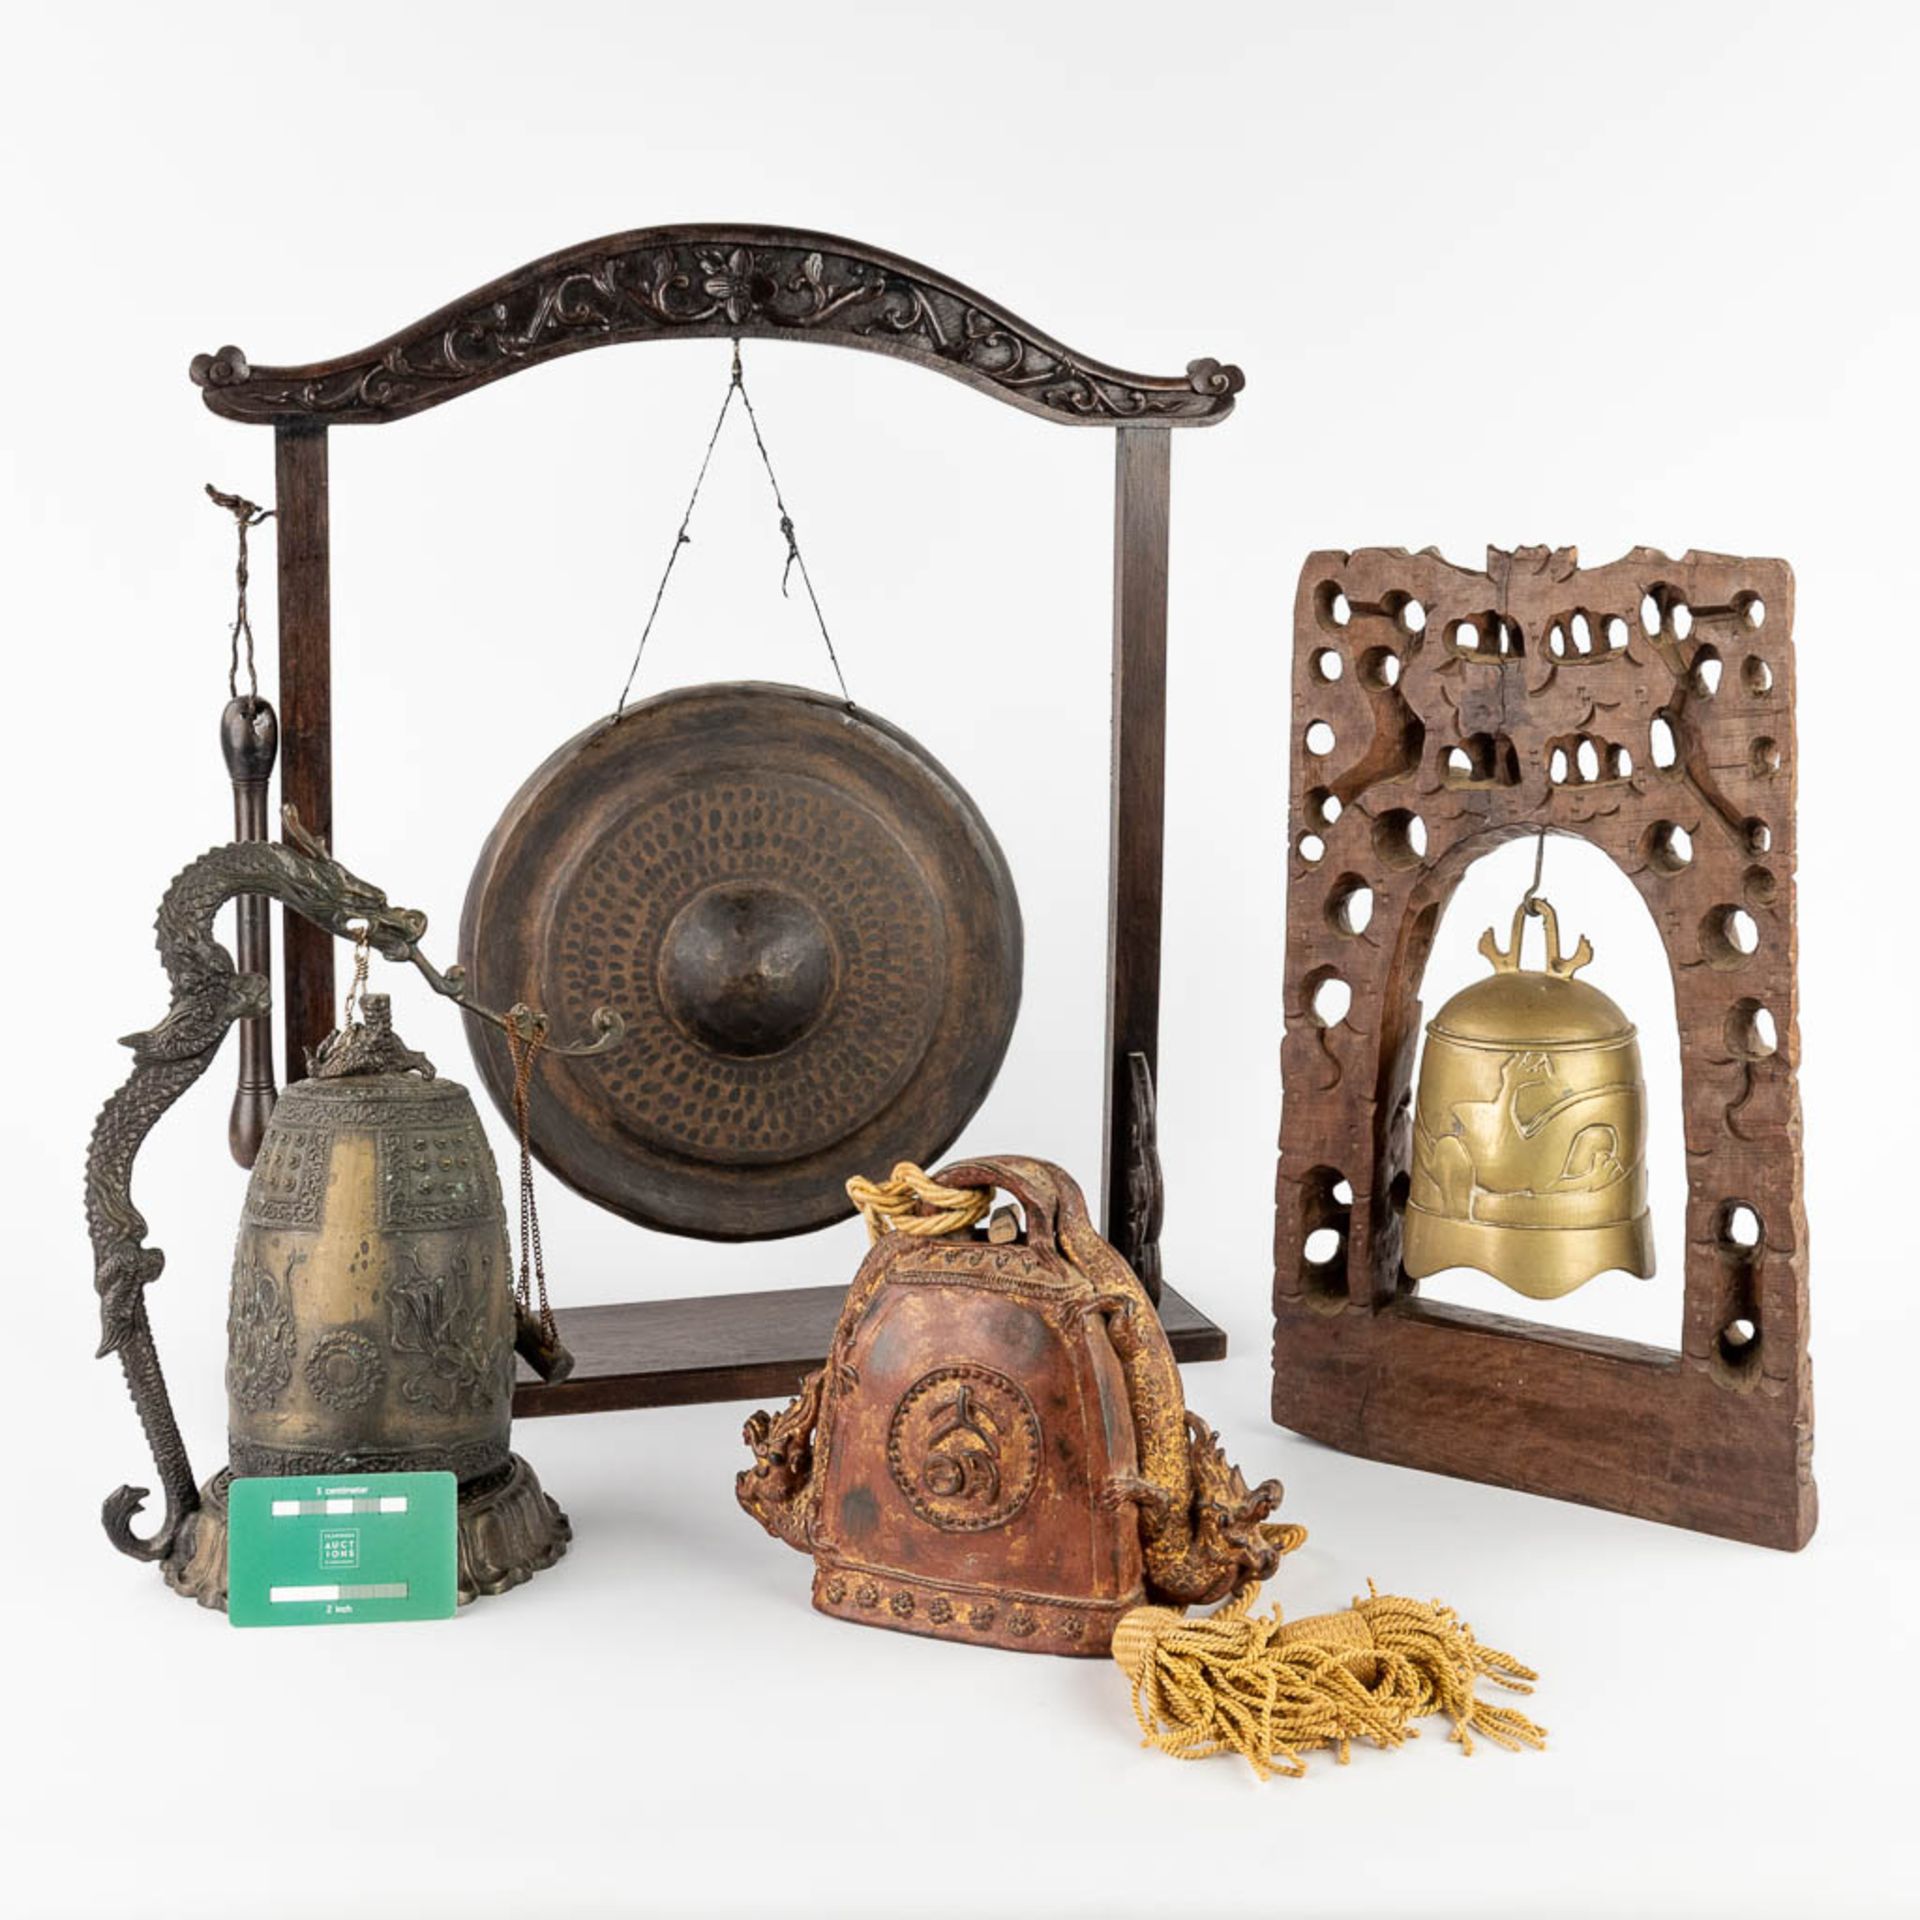 3 bells and a gong, Oriental. 19th/20th C. (L:13 x W:47 x H:55 cm) - Image 2 of 28